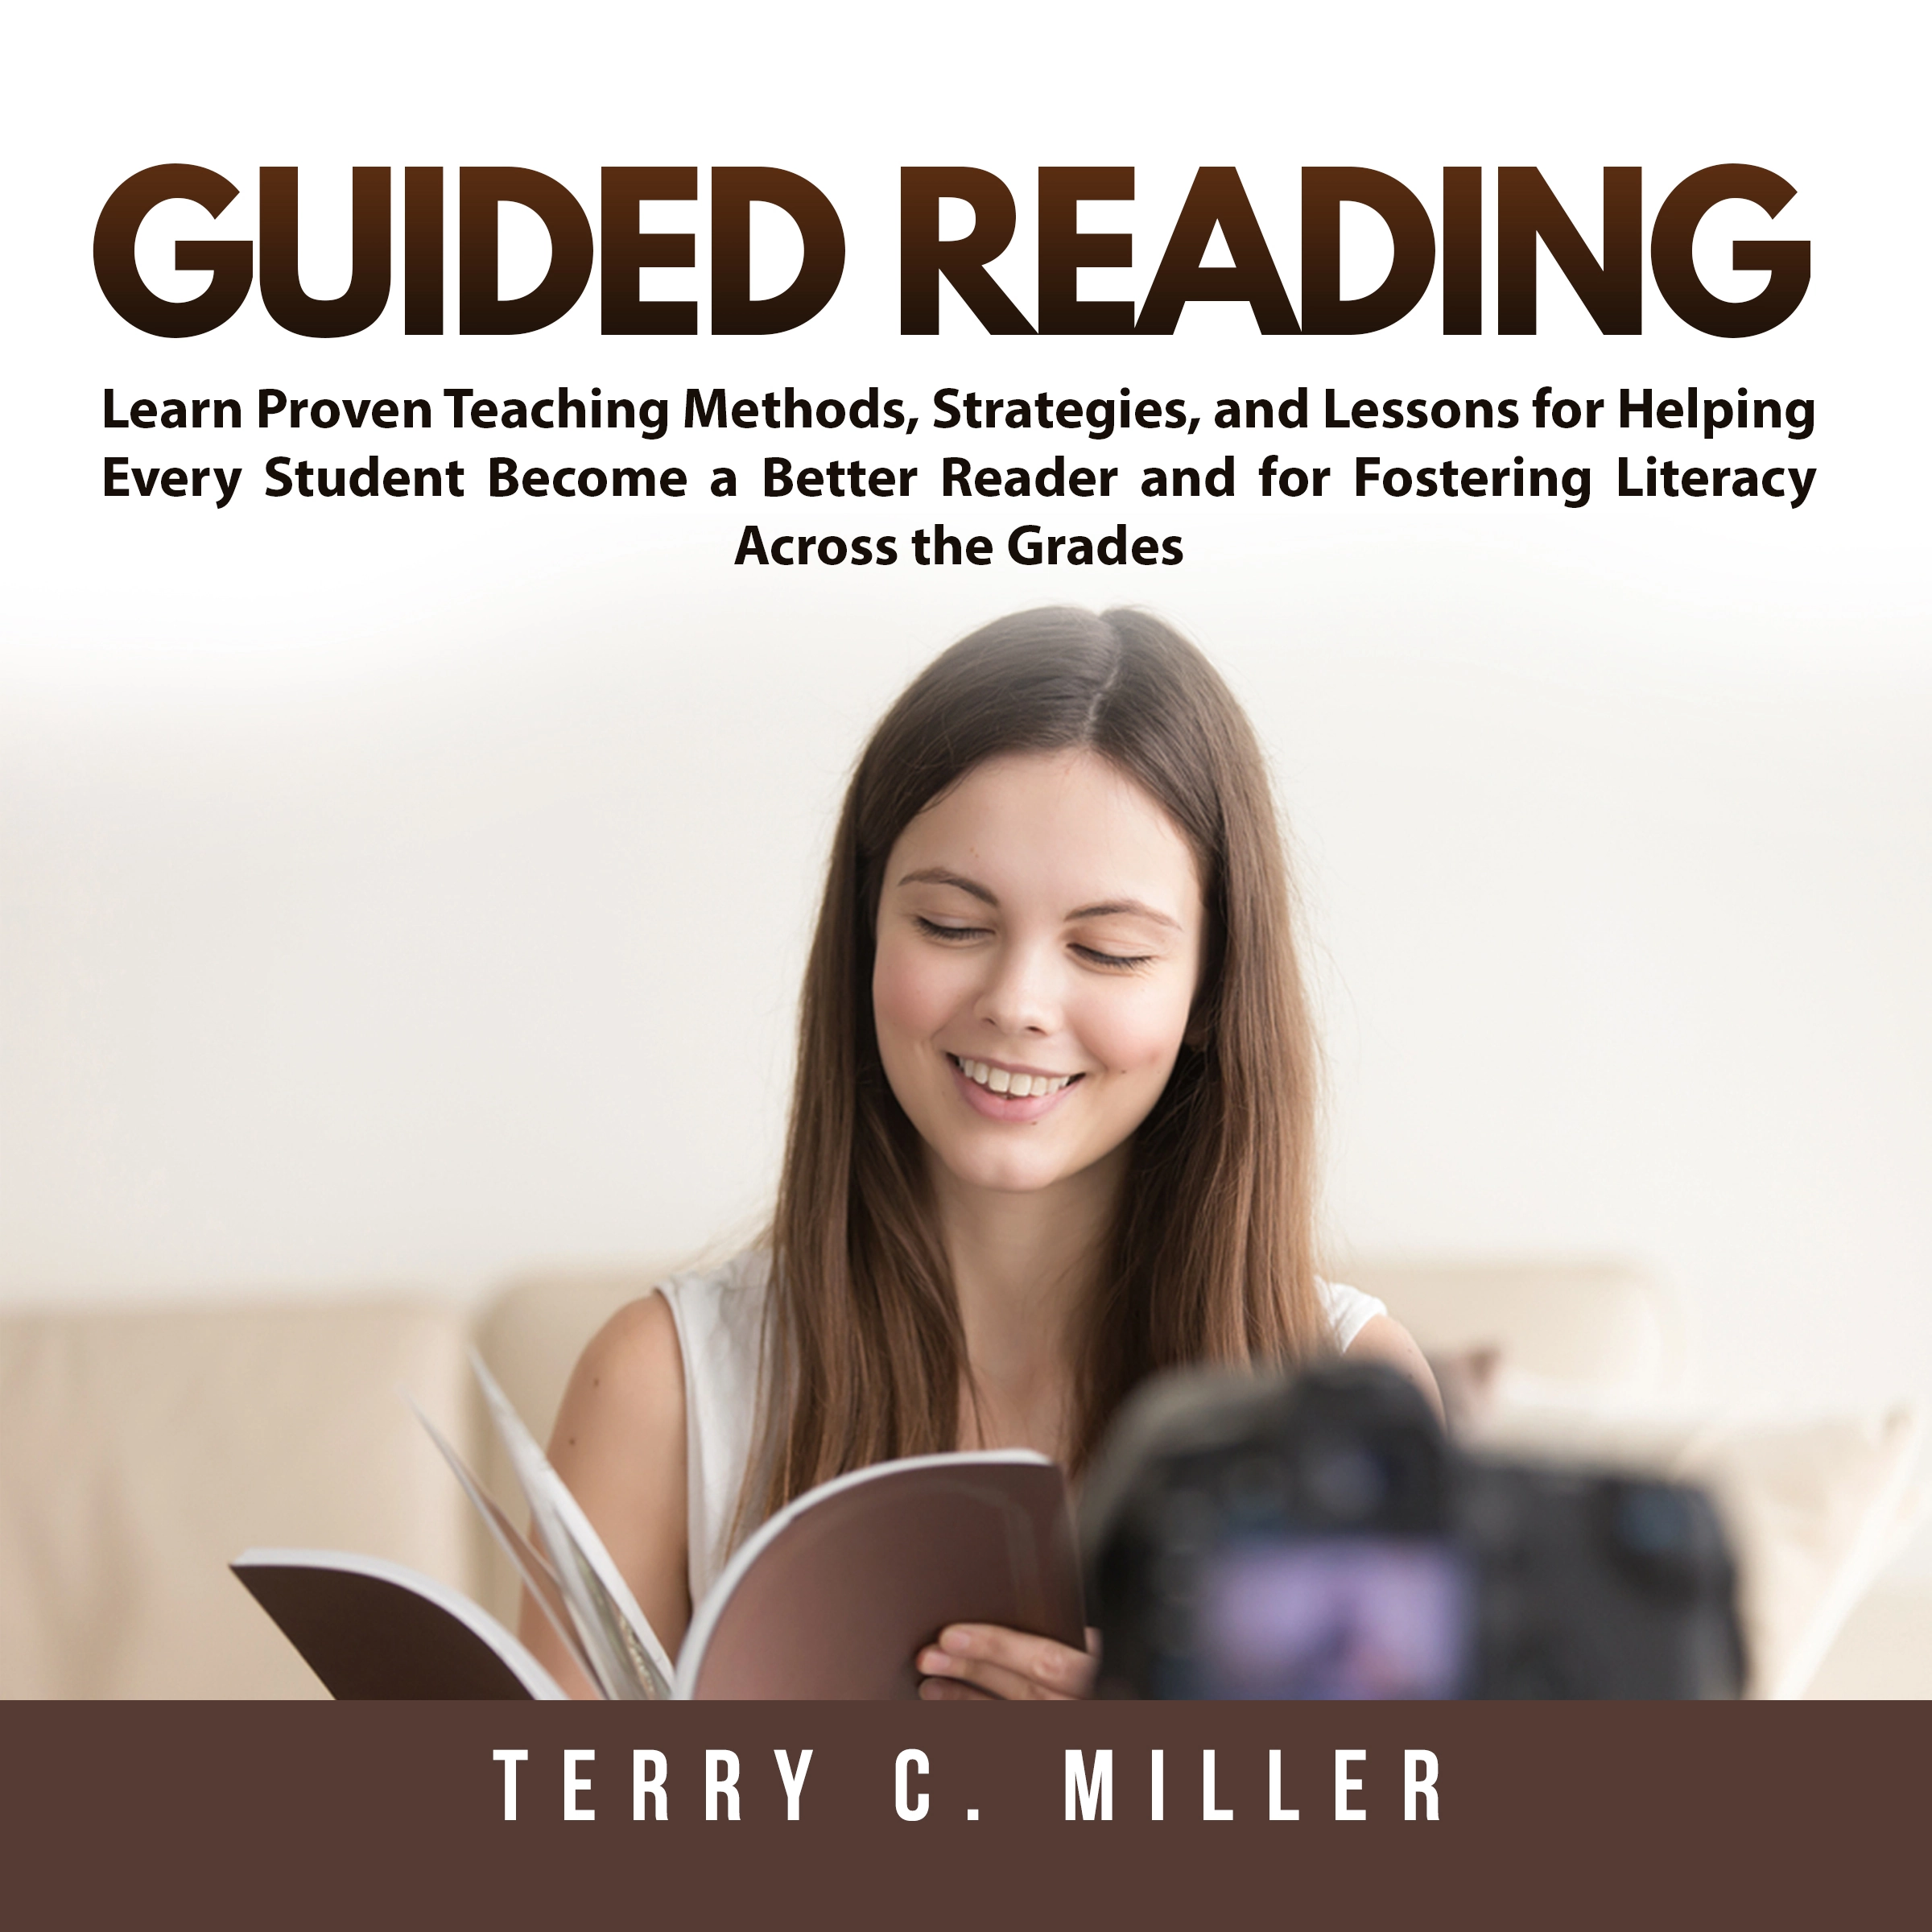 Guided Reading: Learn Proven Teaching Methods, Strategies, and Lessons for Helping Every Student Become a Better Reader and for Fostering Literacy Across the Grades Audiobook by Terry C. Miller